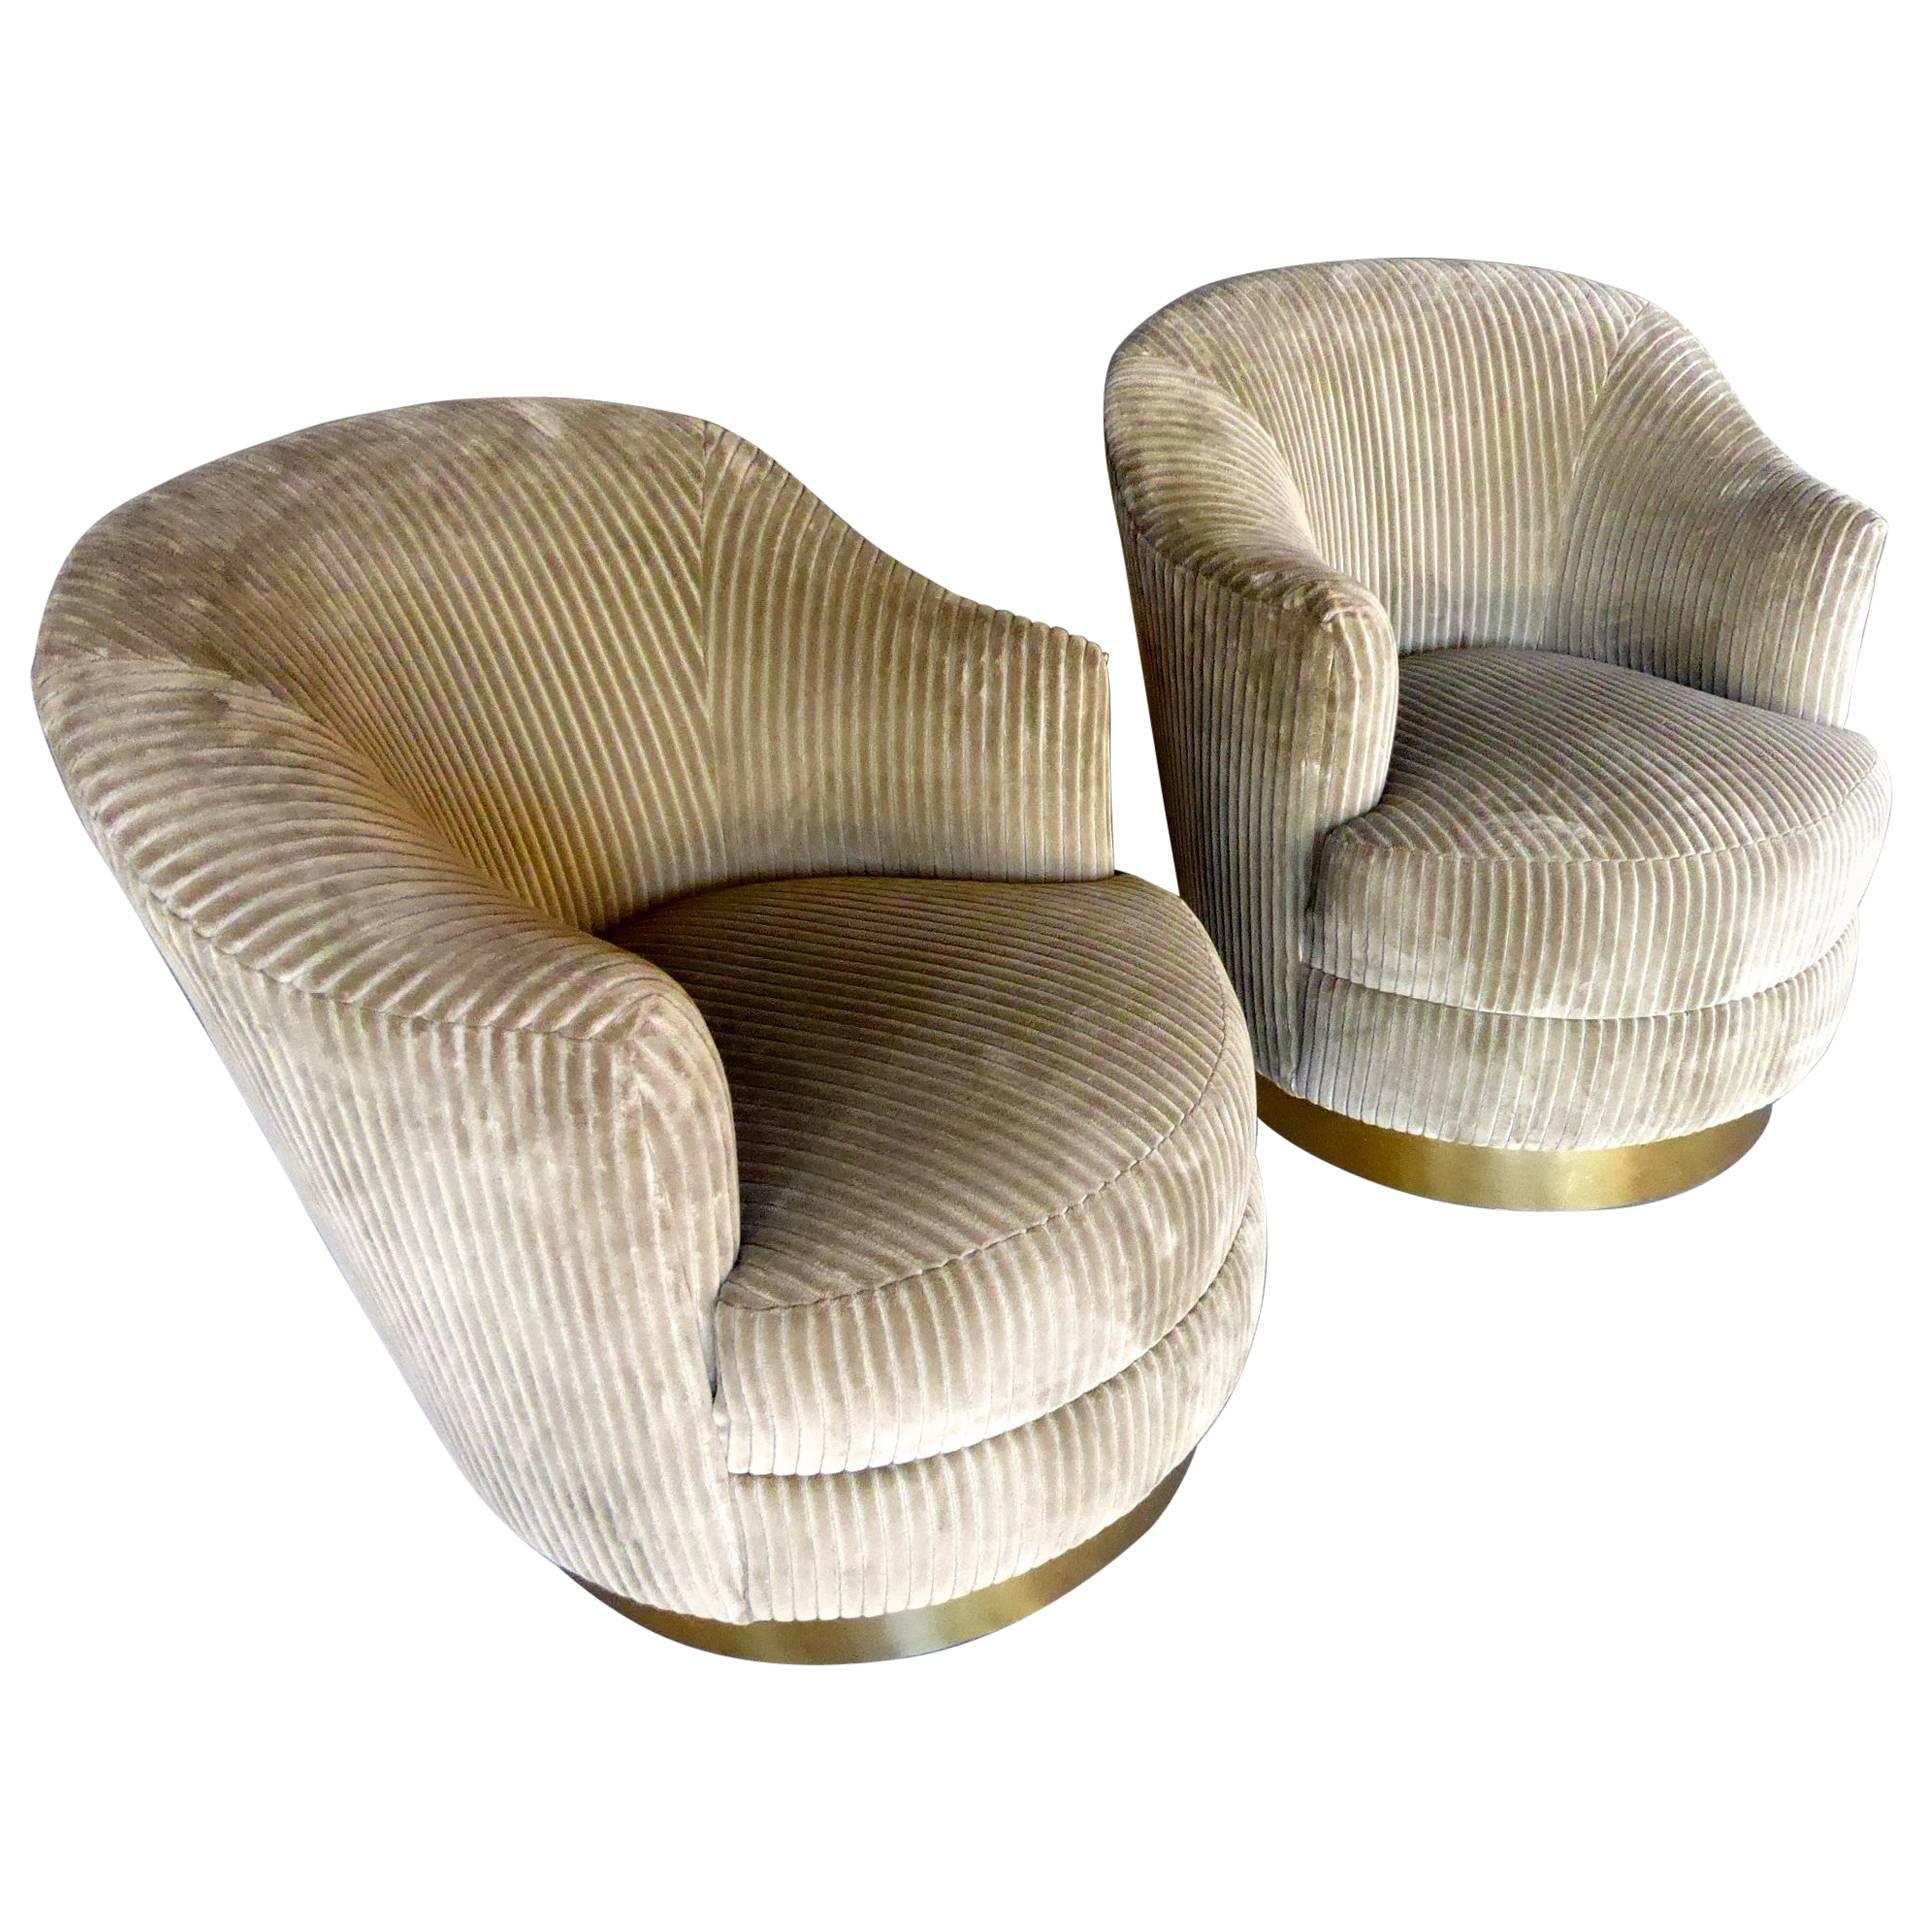 Pair of Upholstered Circular Club Chairs by Karl Springer, circa 1970s For Sale